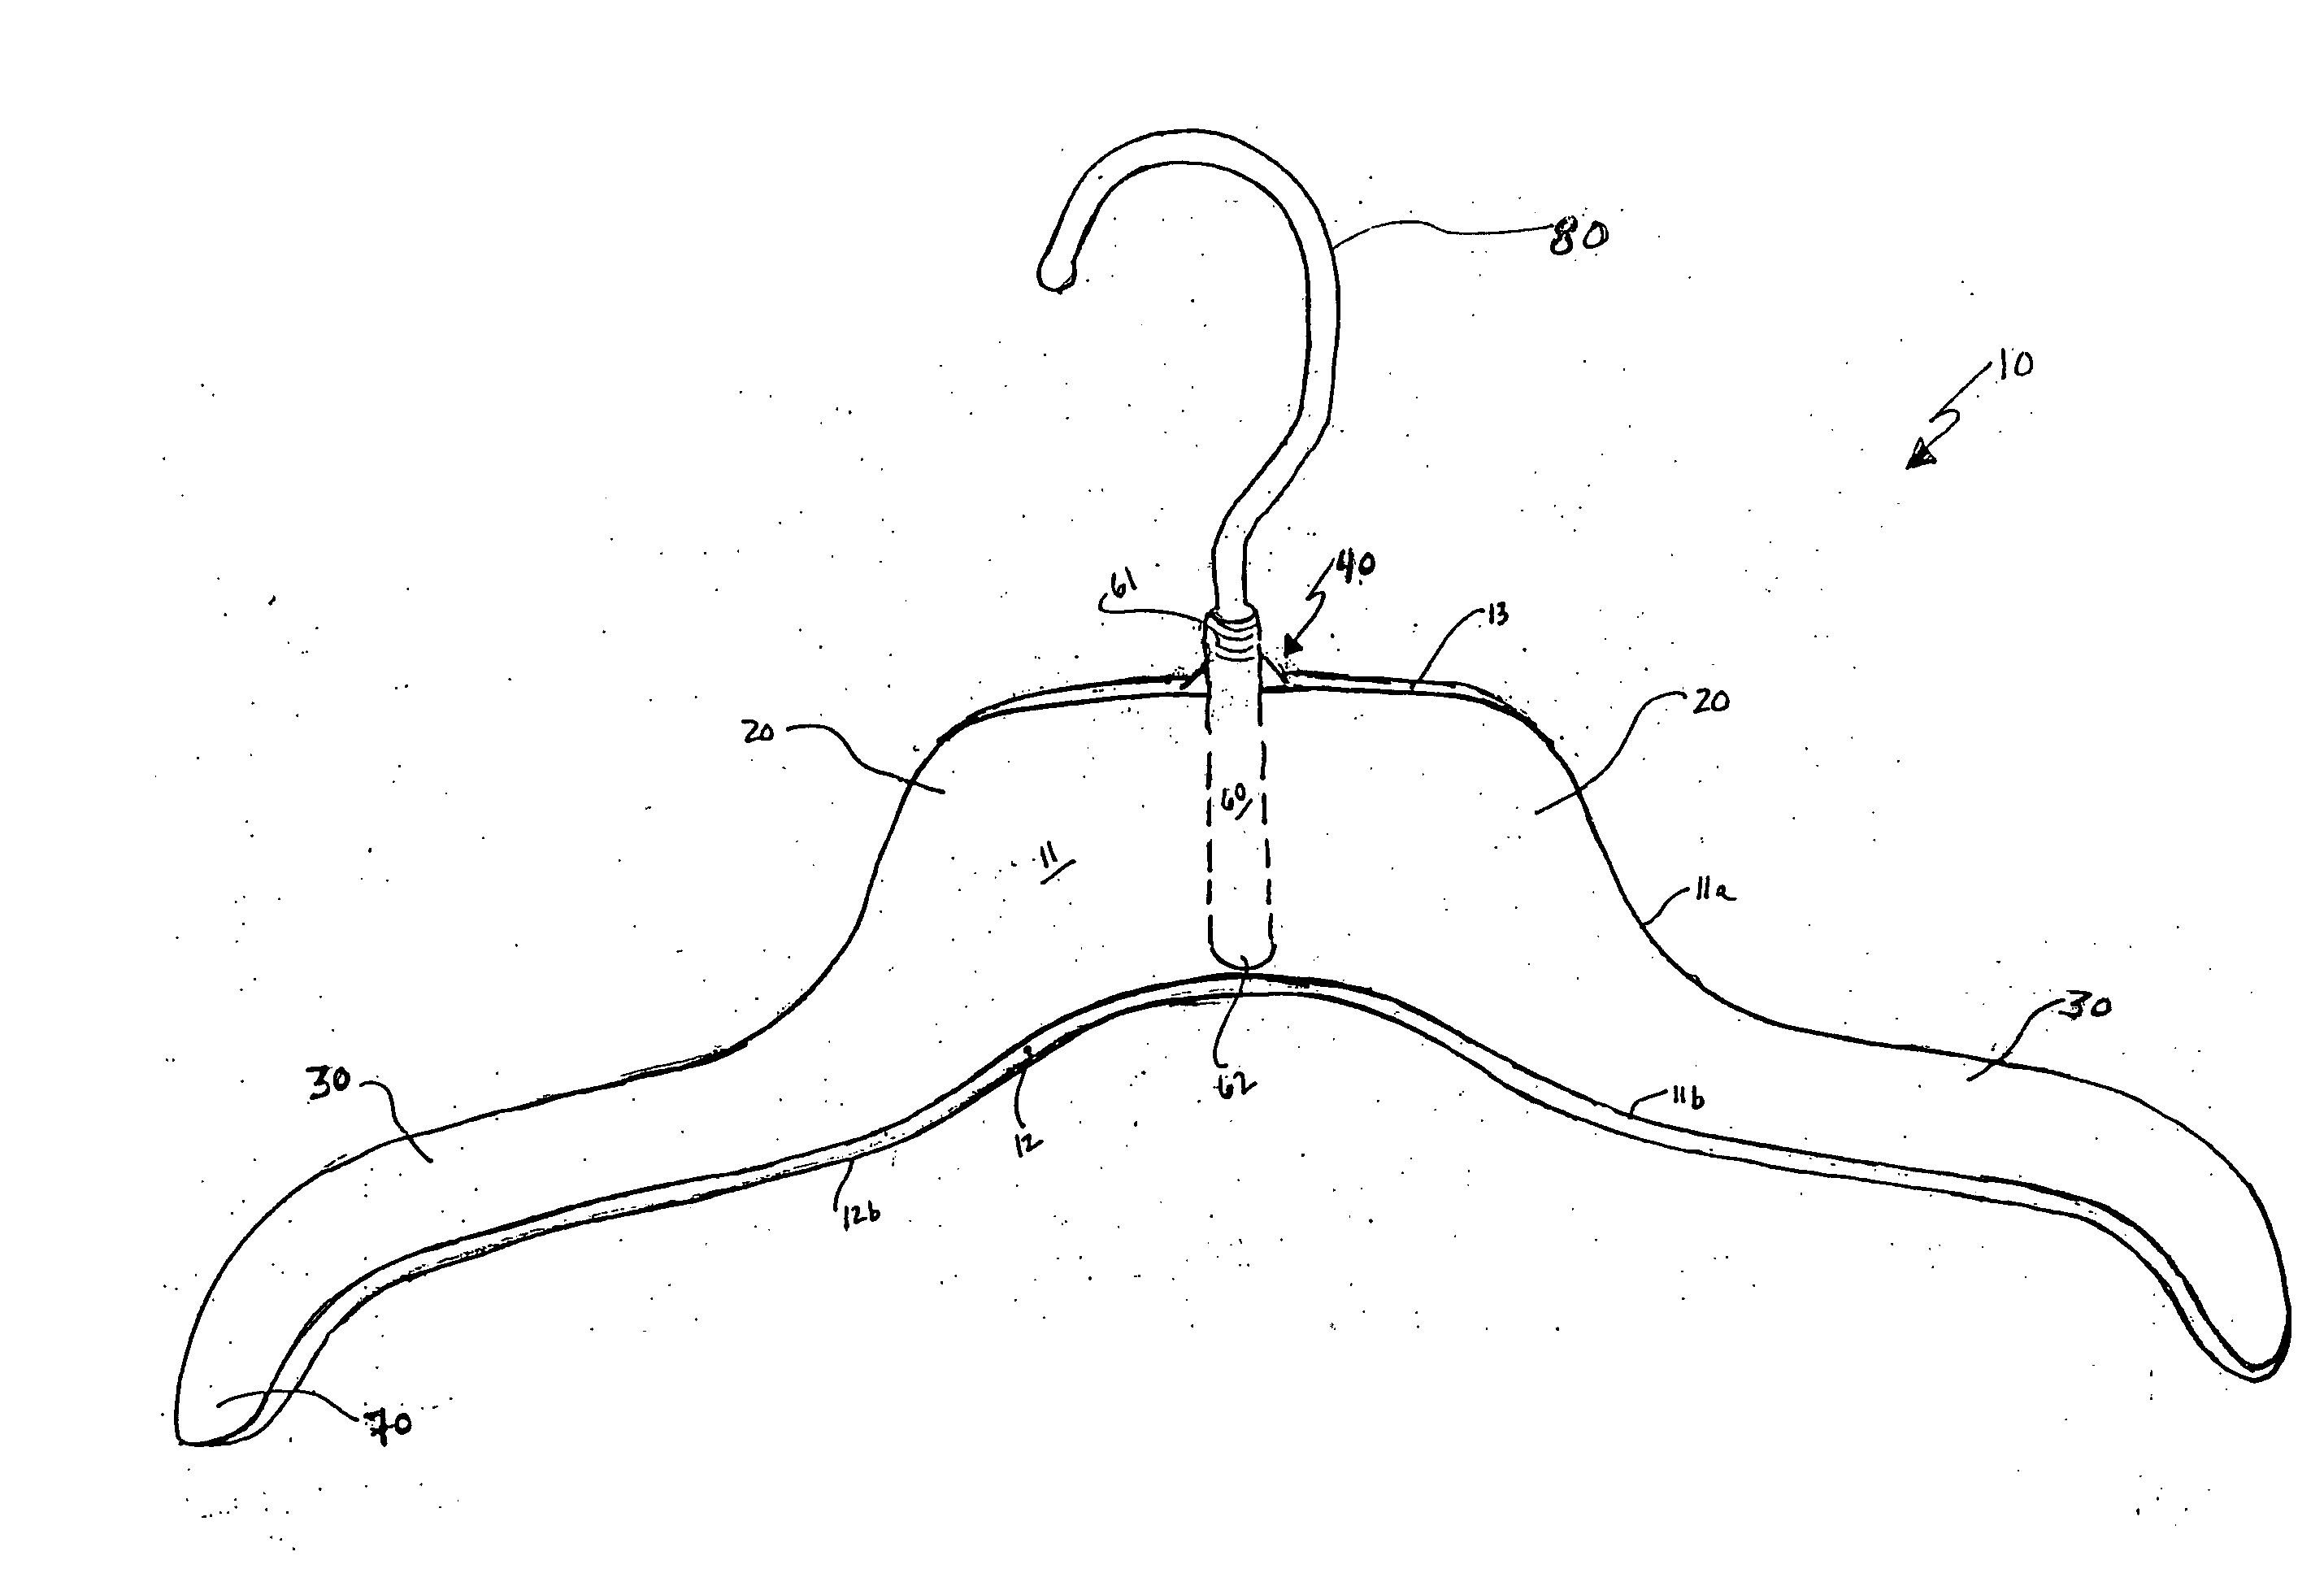 Garment hanger with central support rib